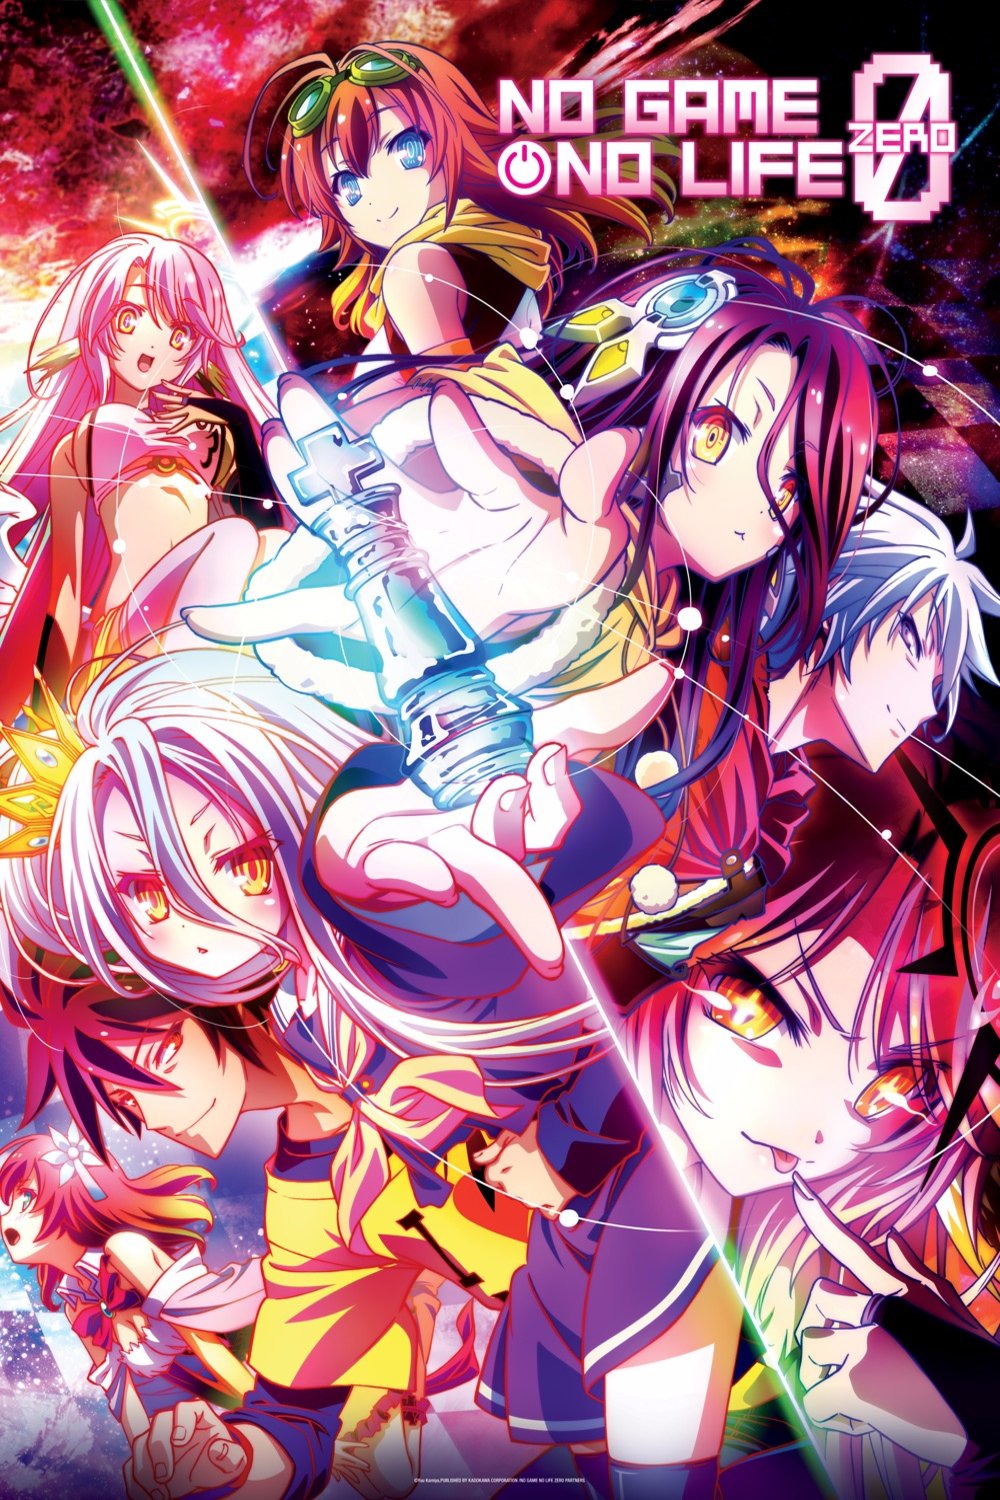 Japanese poster of the movie No Game, No Life: Zero